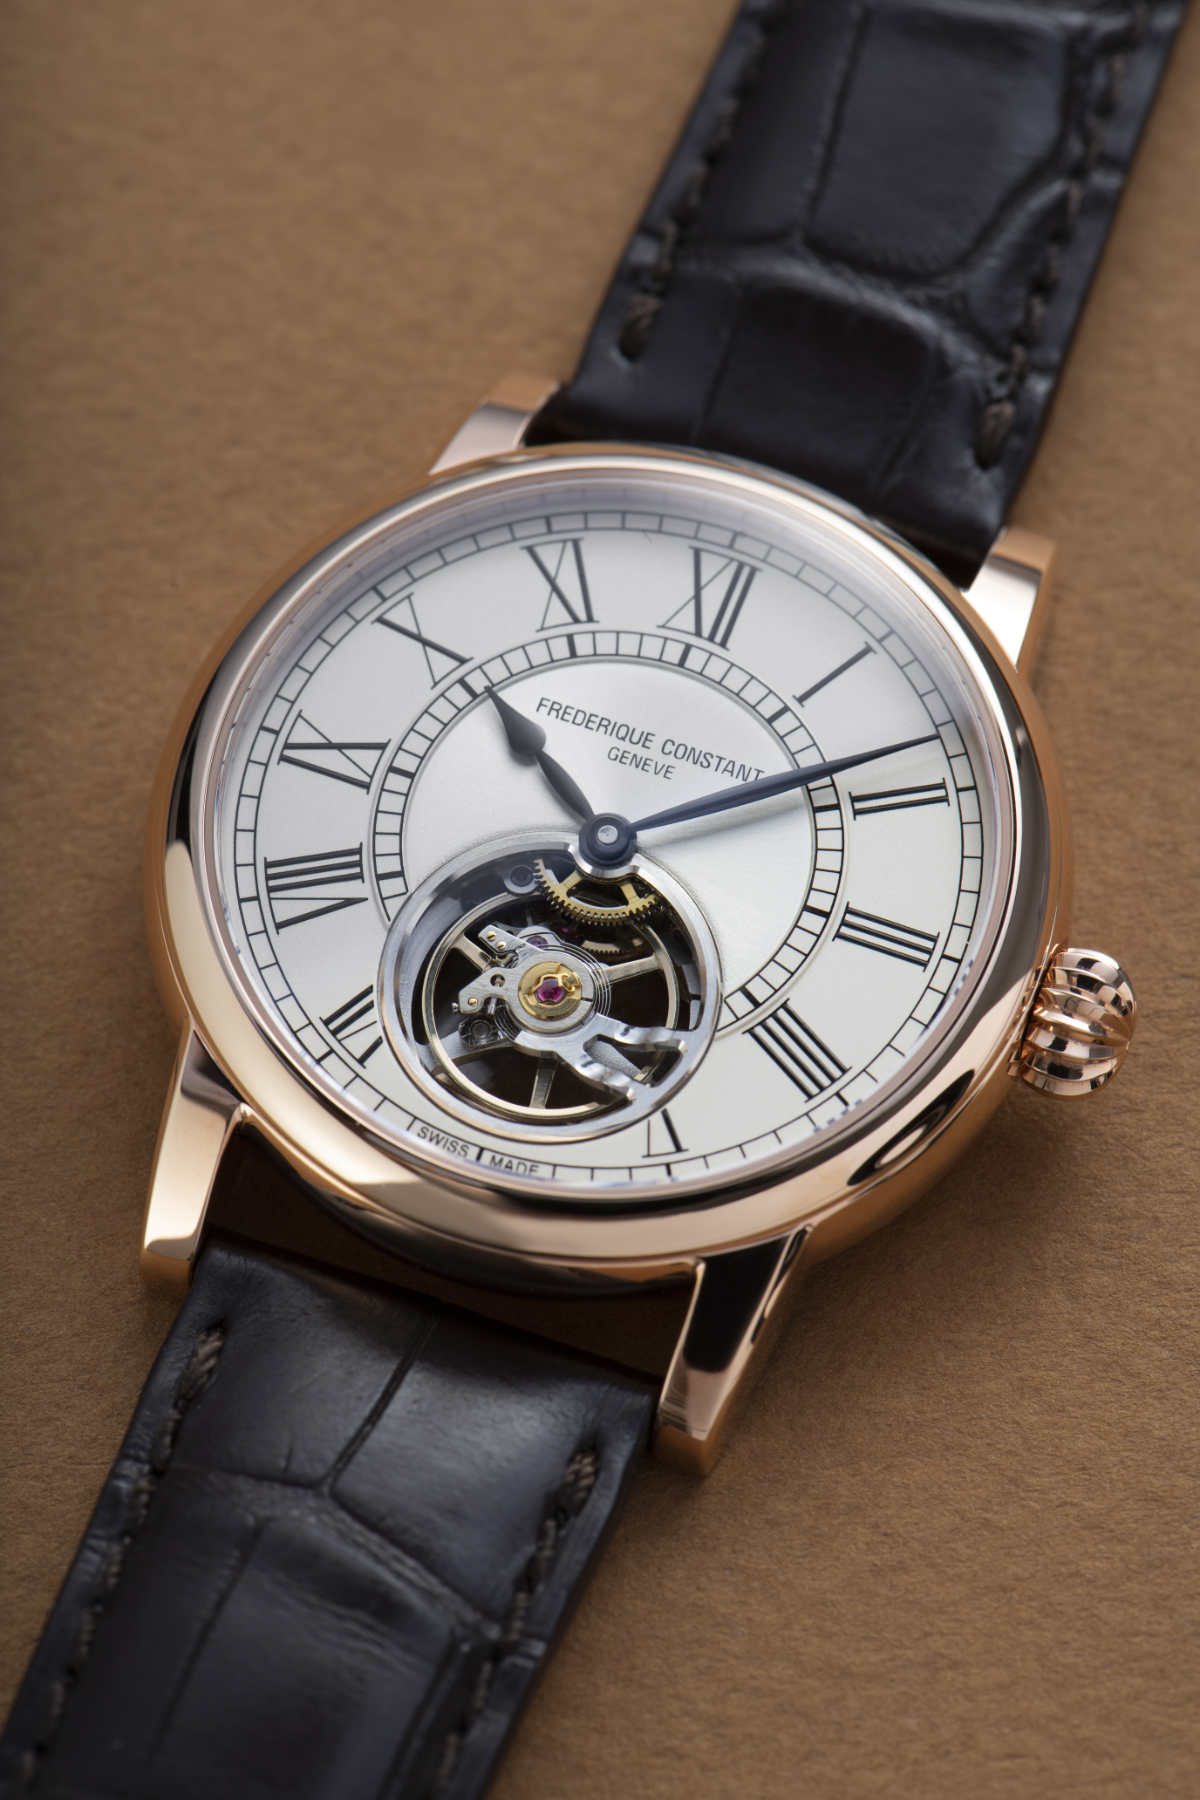 Classics Heart Beat Manufacture: A New Look For The Frederique Constant Icon